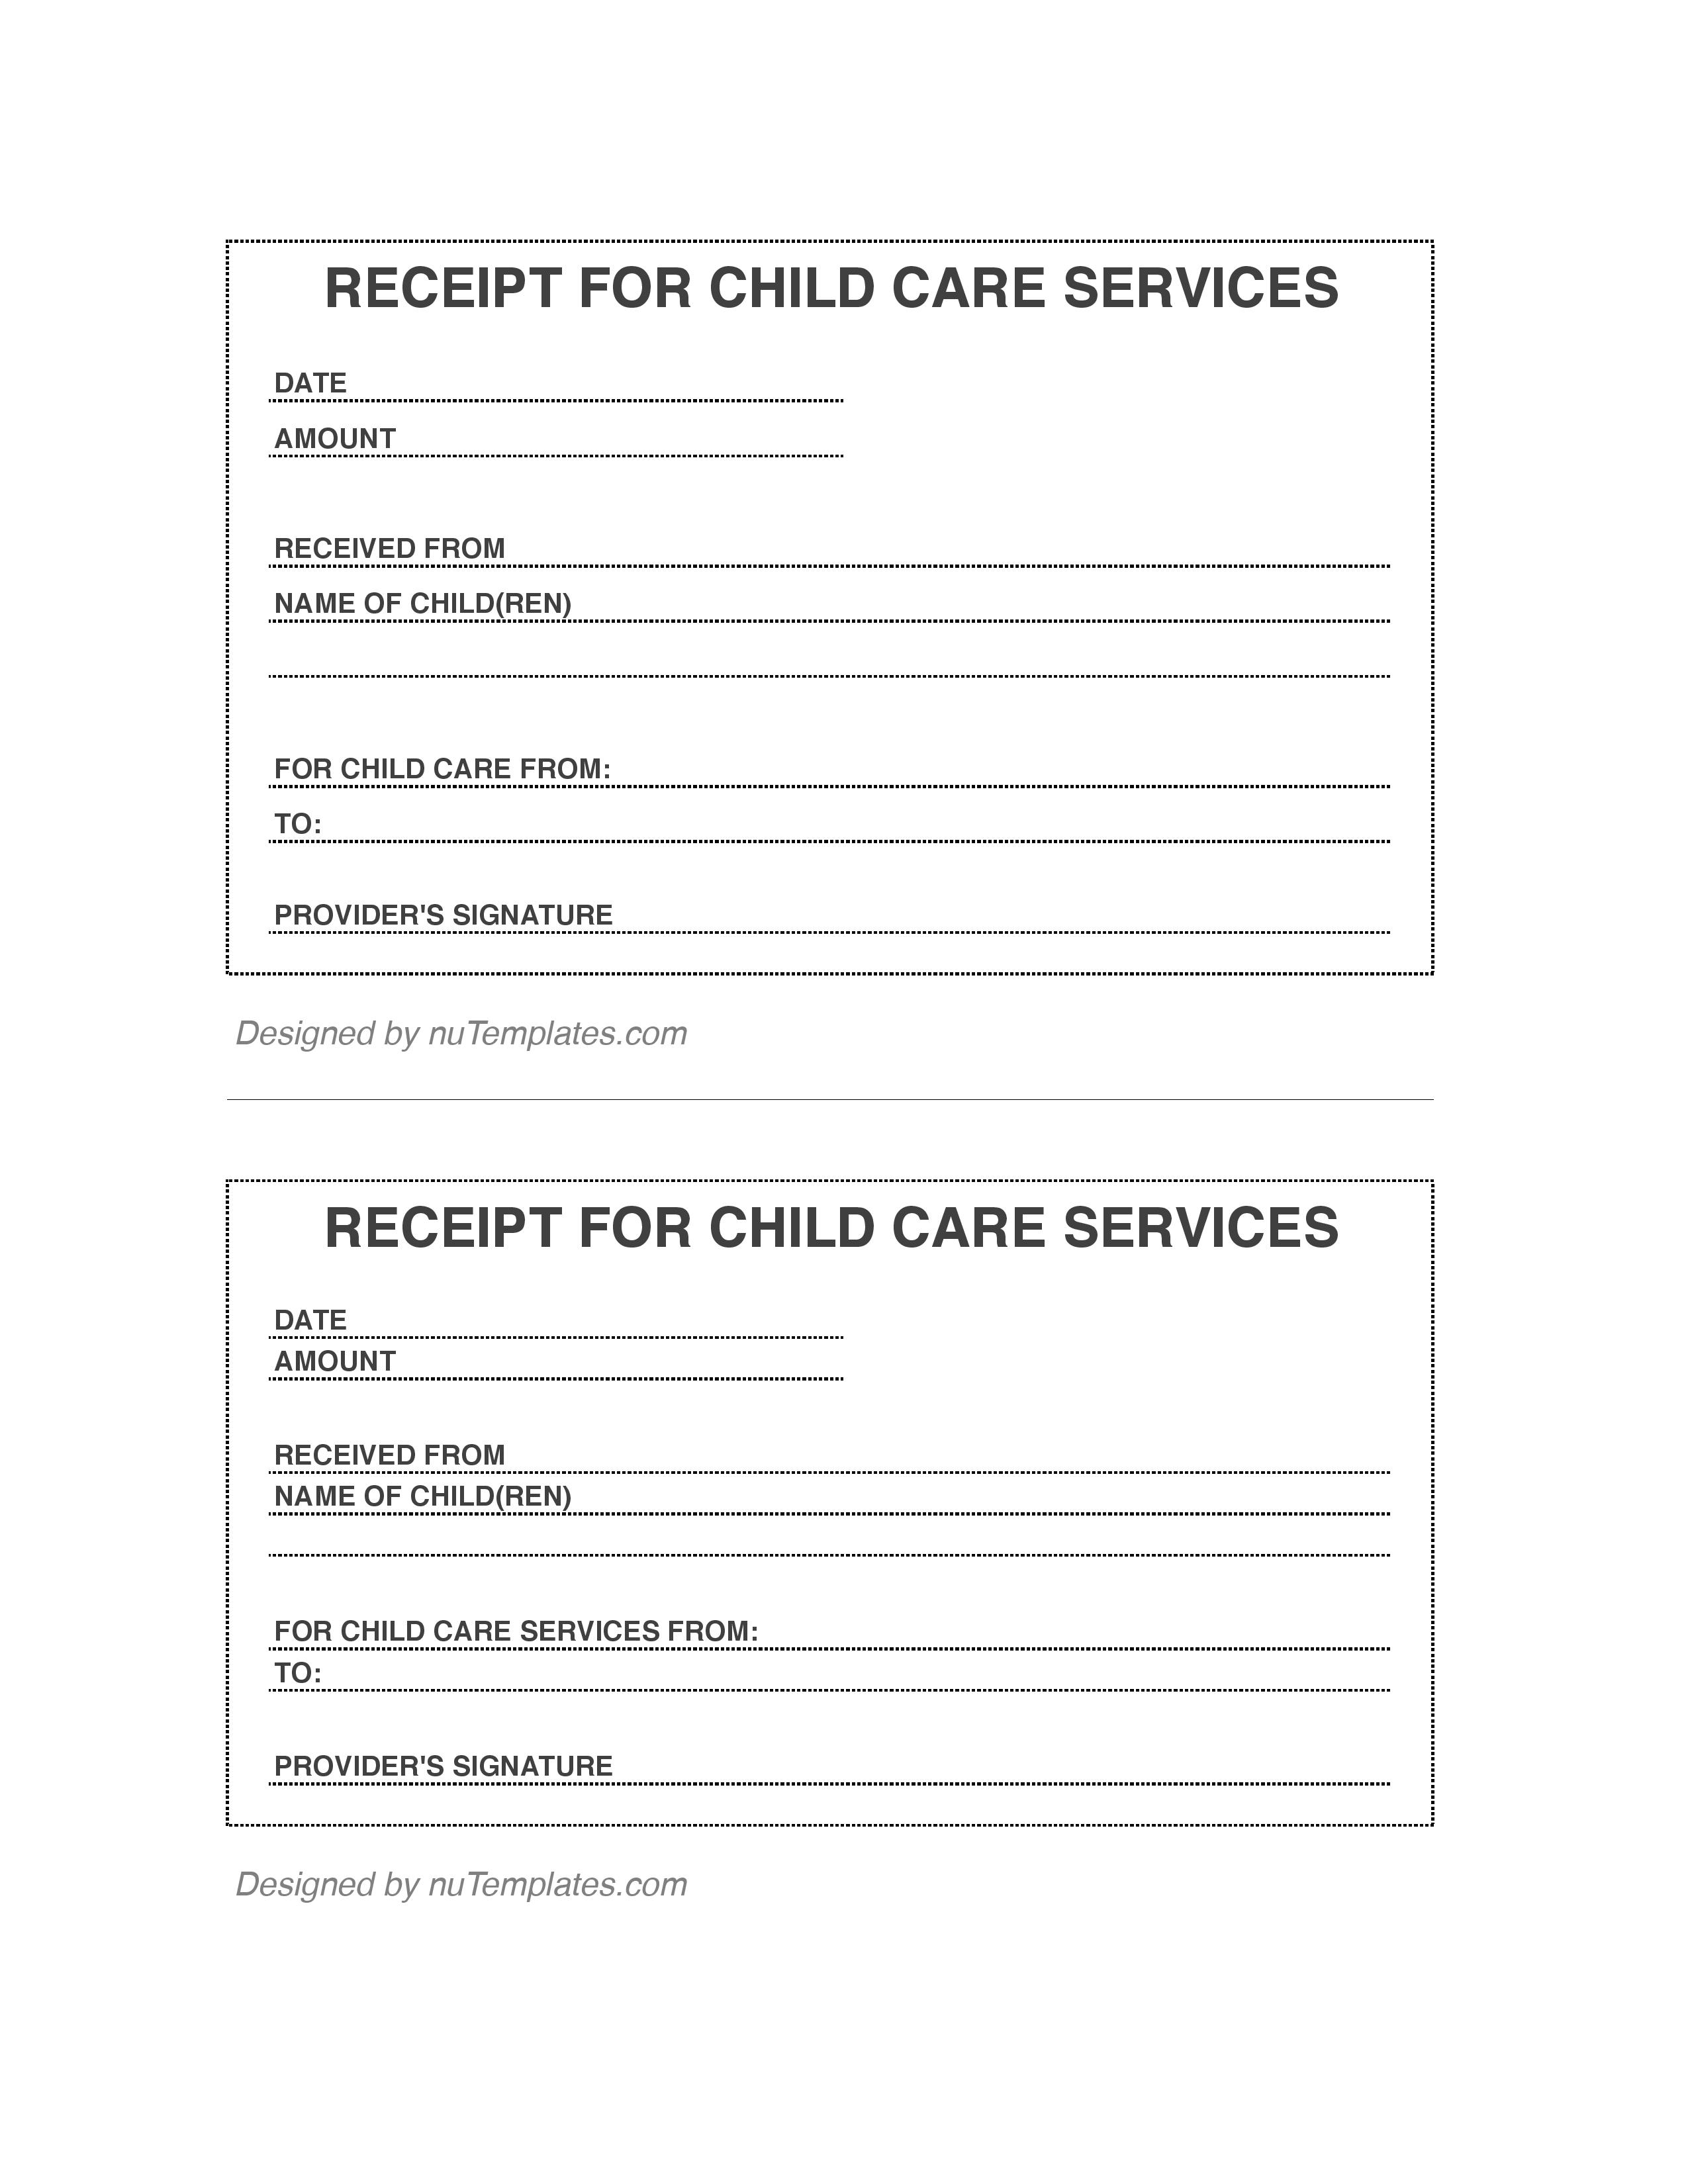 daycare-receipt-template-daycare-receipts-nutemplates